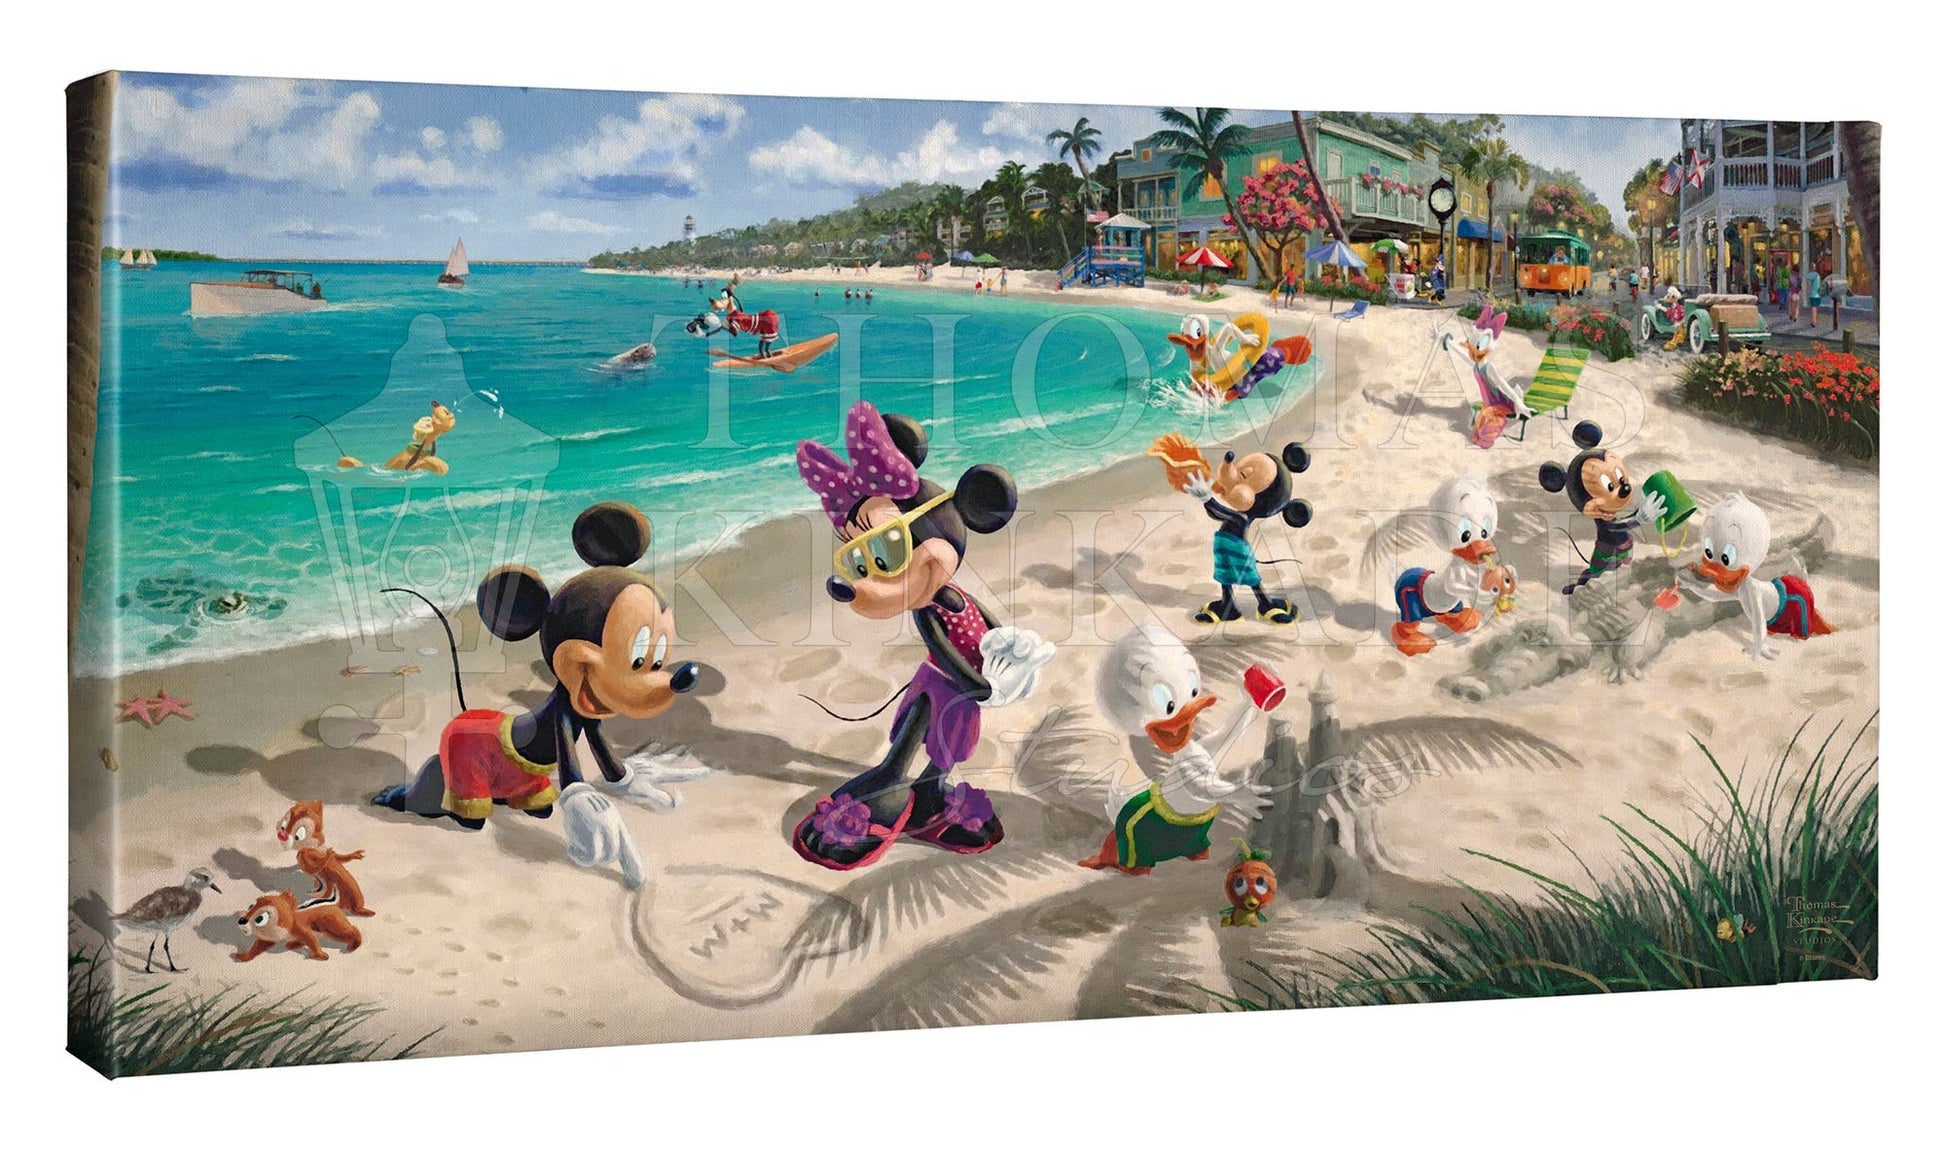 In this scene, Mickey Mouse and Minnie Mouse enjoy a warm afternoon on a sandy Key West beach with family and friends.